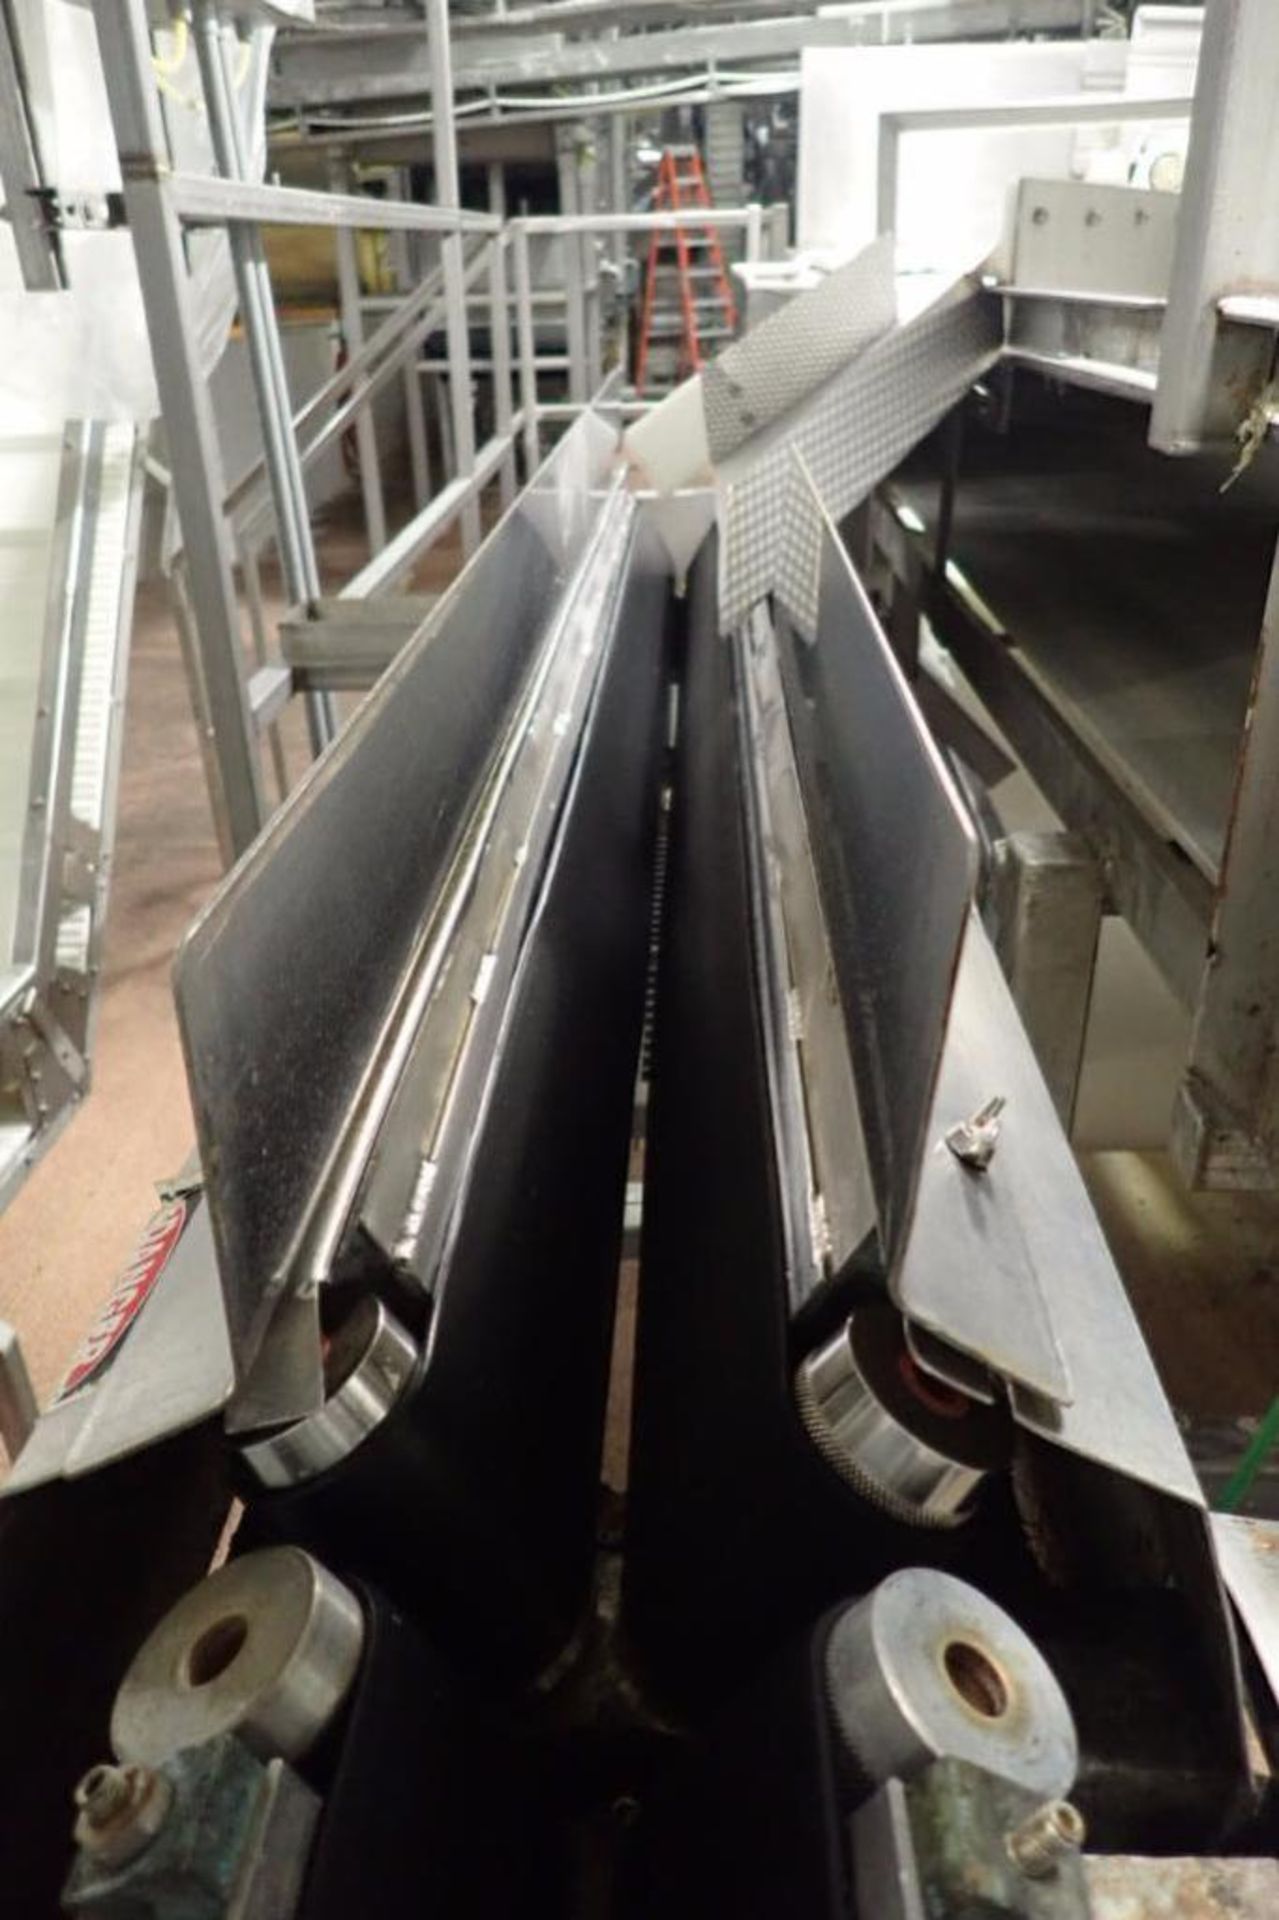 Easy speedy v-trough belt conveyor, 90 in. long, SS frame, motor and drive ** Rigging Fee: $200 ** - Image 3 of 4